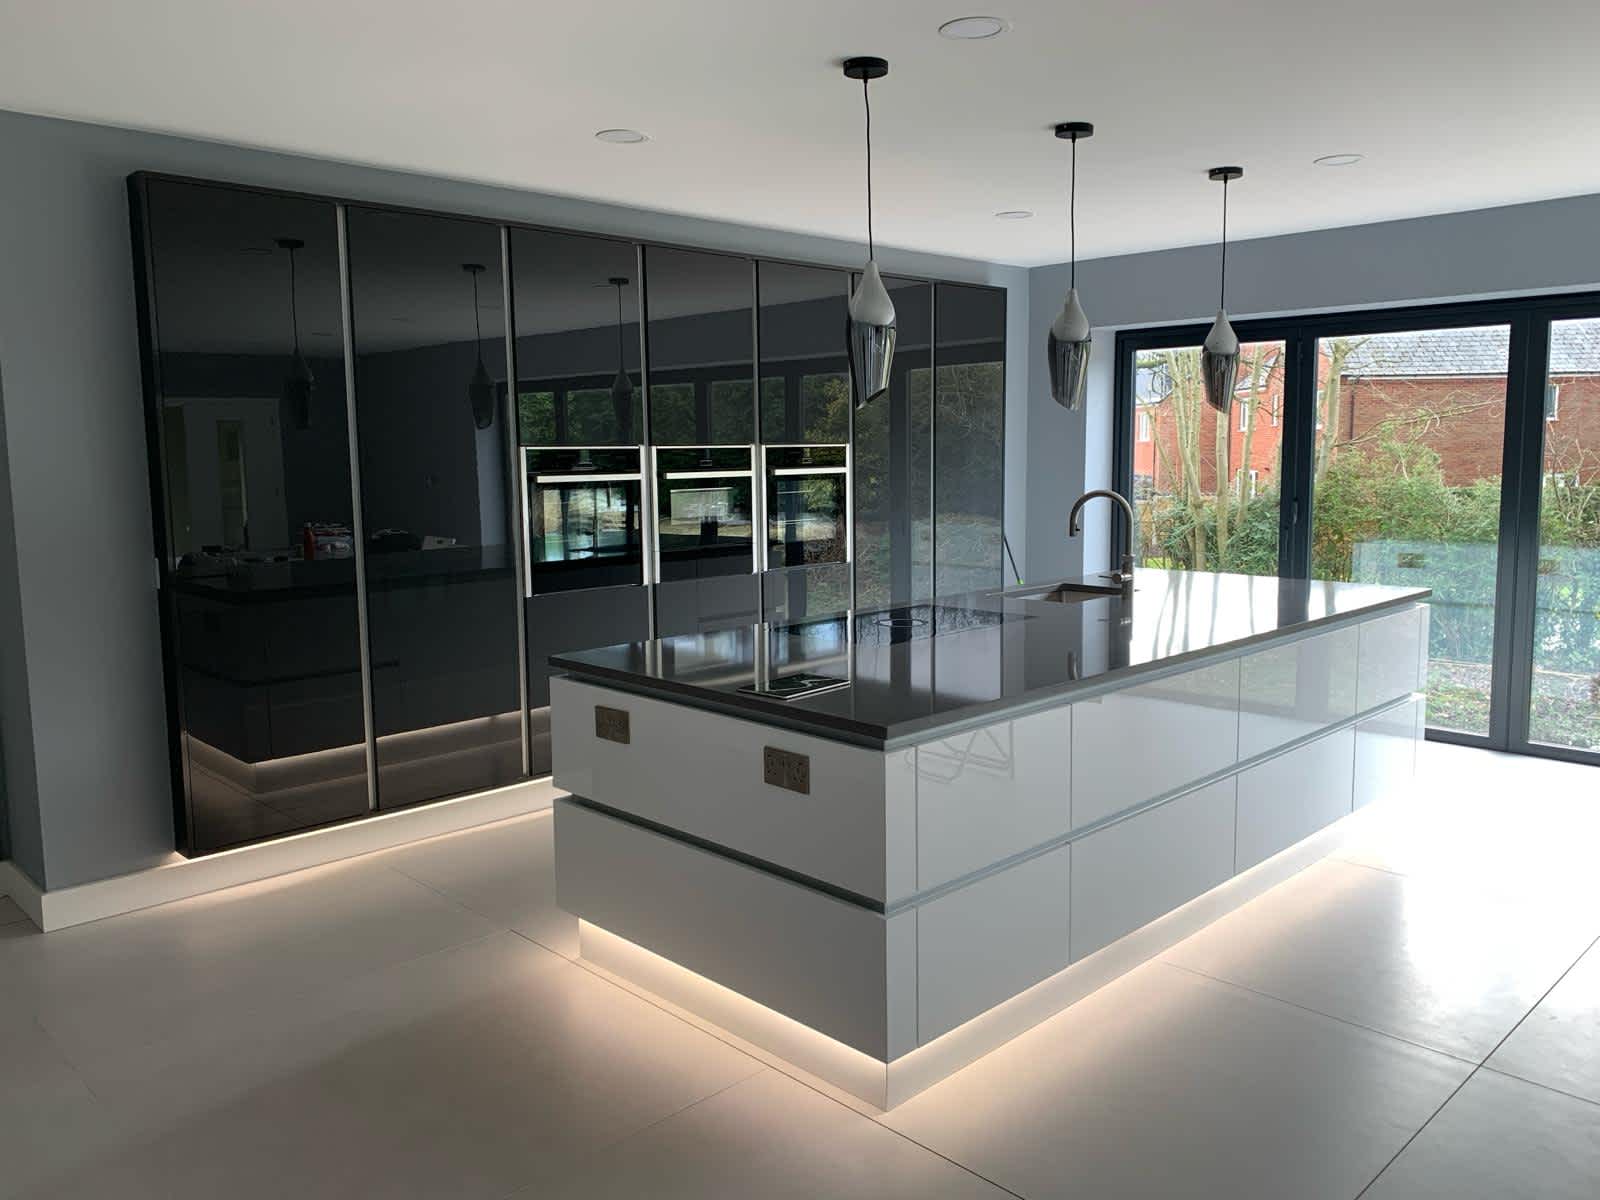 A guide to Kitchen Worktop Sizes, Materials and Fitting Options